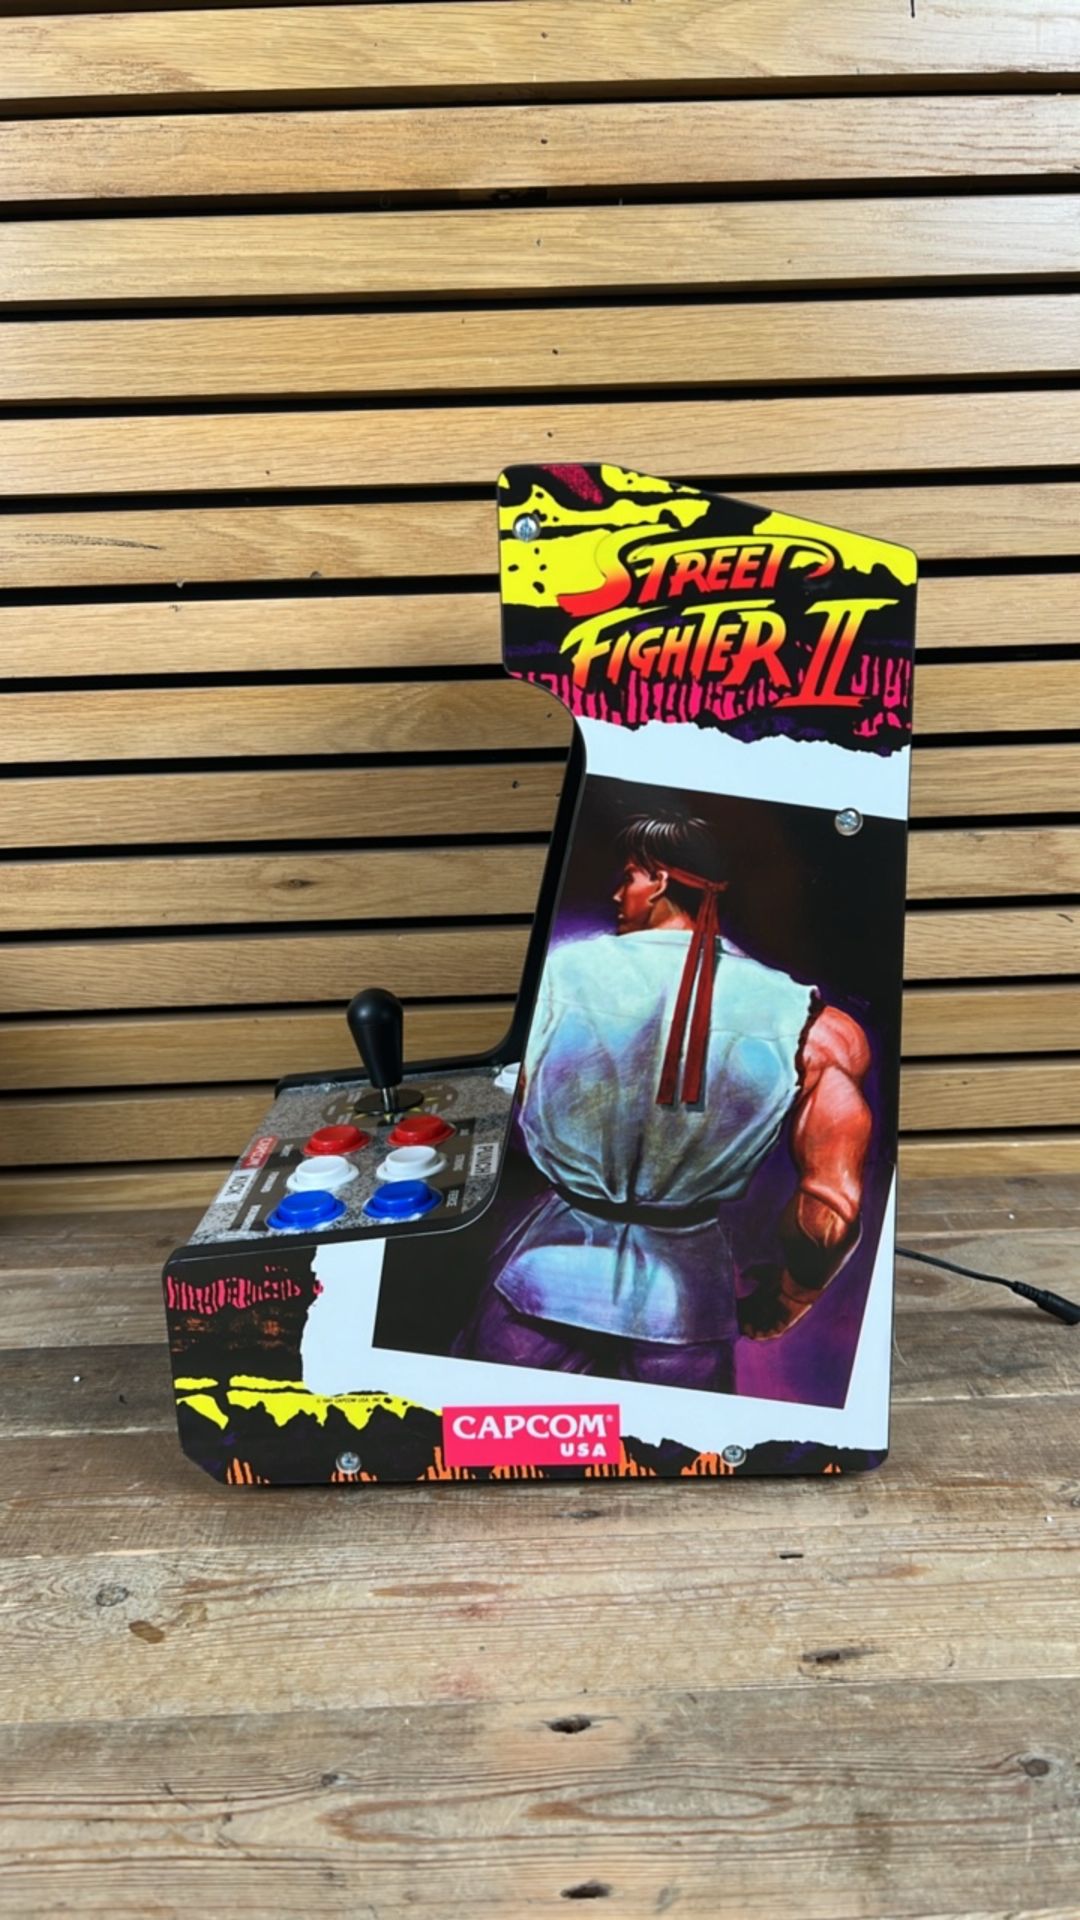 Street Fighter Countercade Games Console 40cm - Image 7 of 8